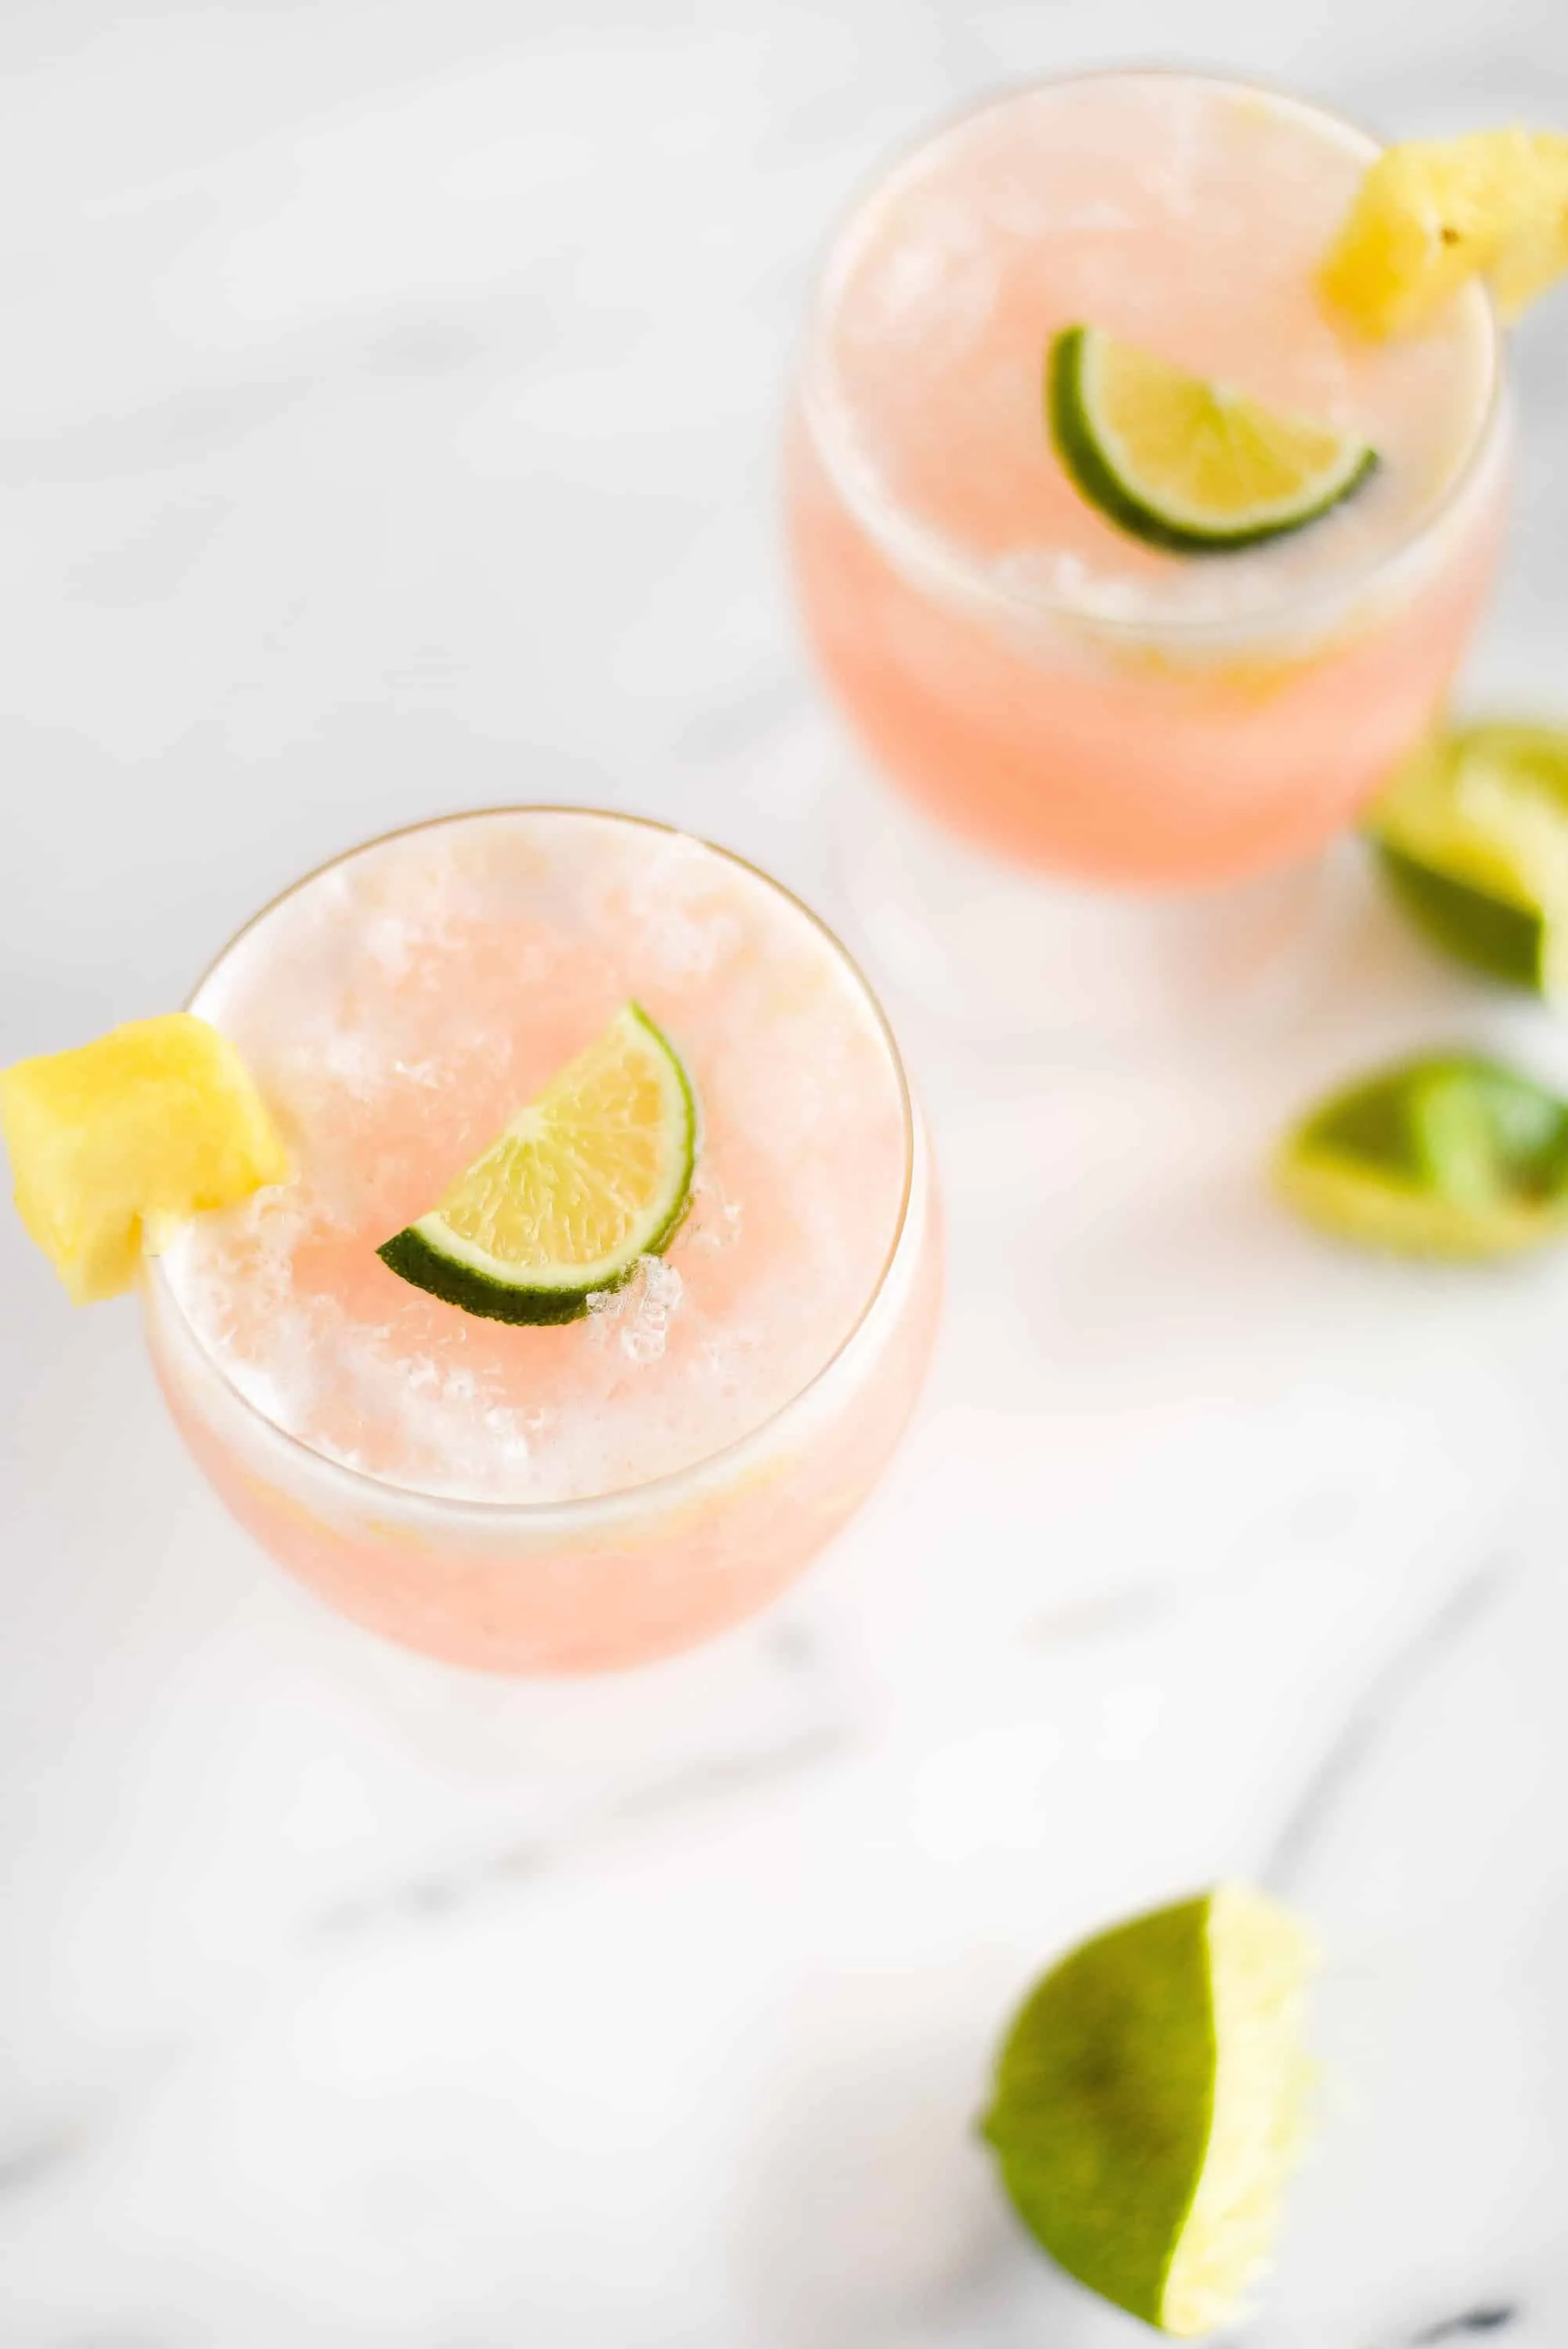 LaCroix is a wonderful way to lighten up cocktails without sacrificing flavor. You’ll love this pineapple, coconut, guava, and lime cocktail, it tastes like paradise in a glass!